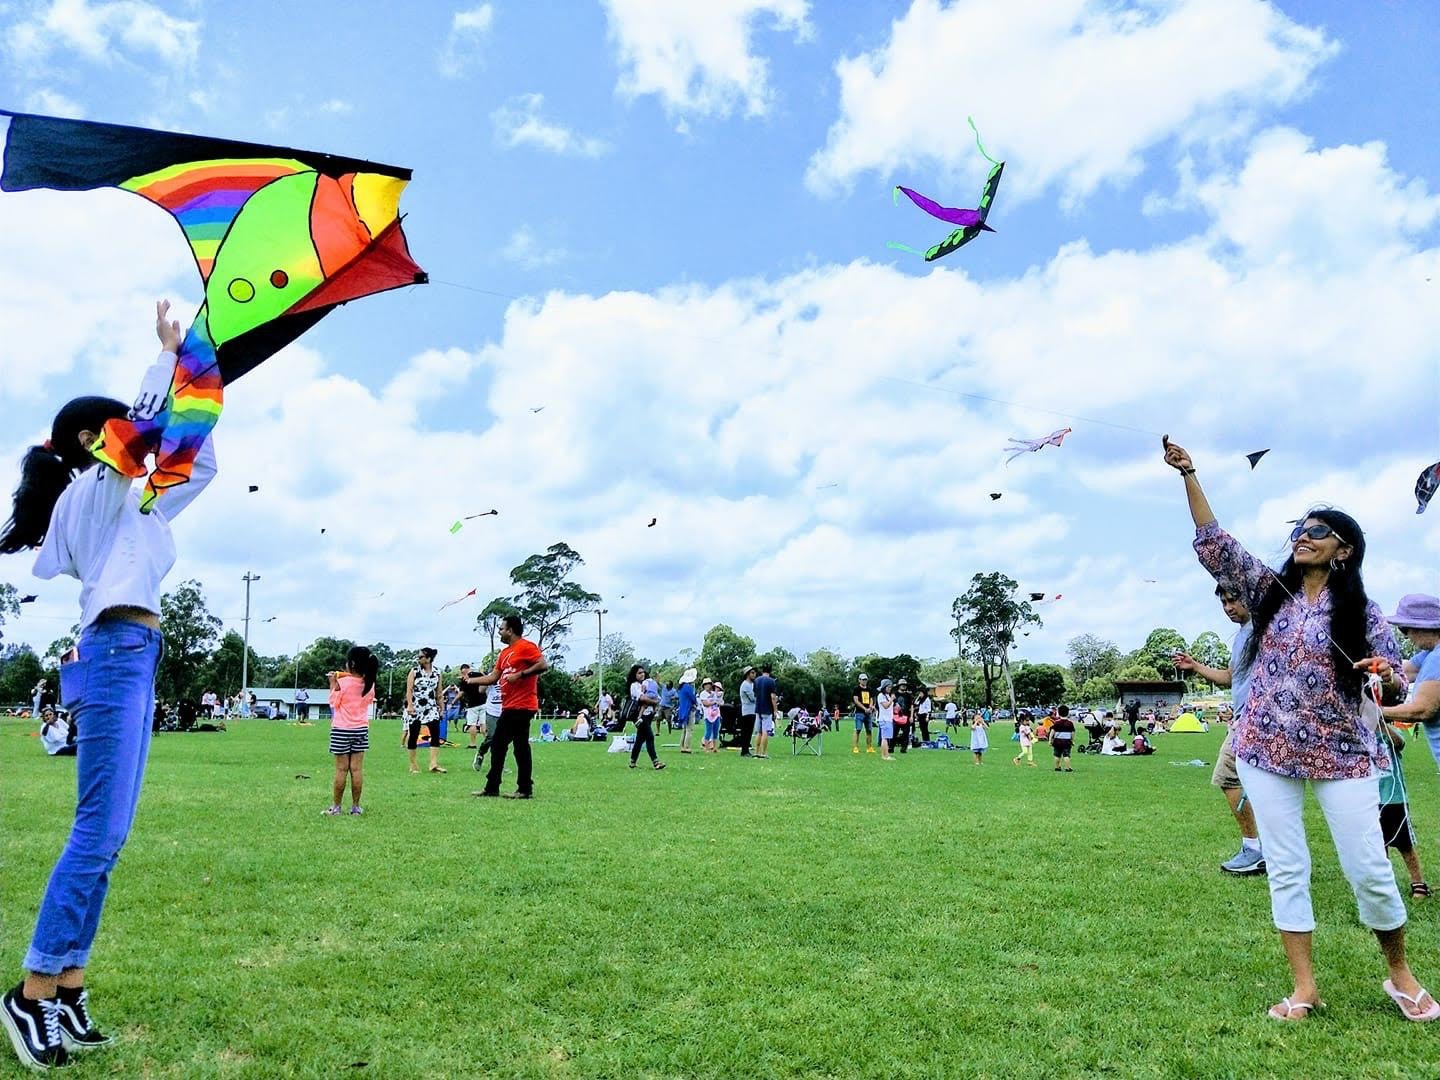 'Like a rainbow flying above you': the magic of the Kite Festival is back